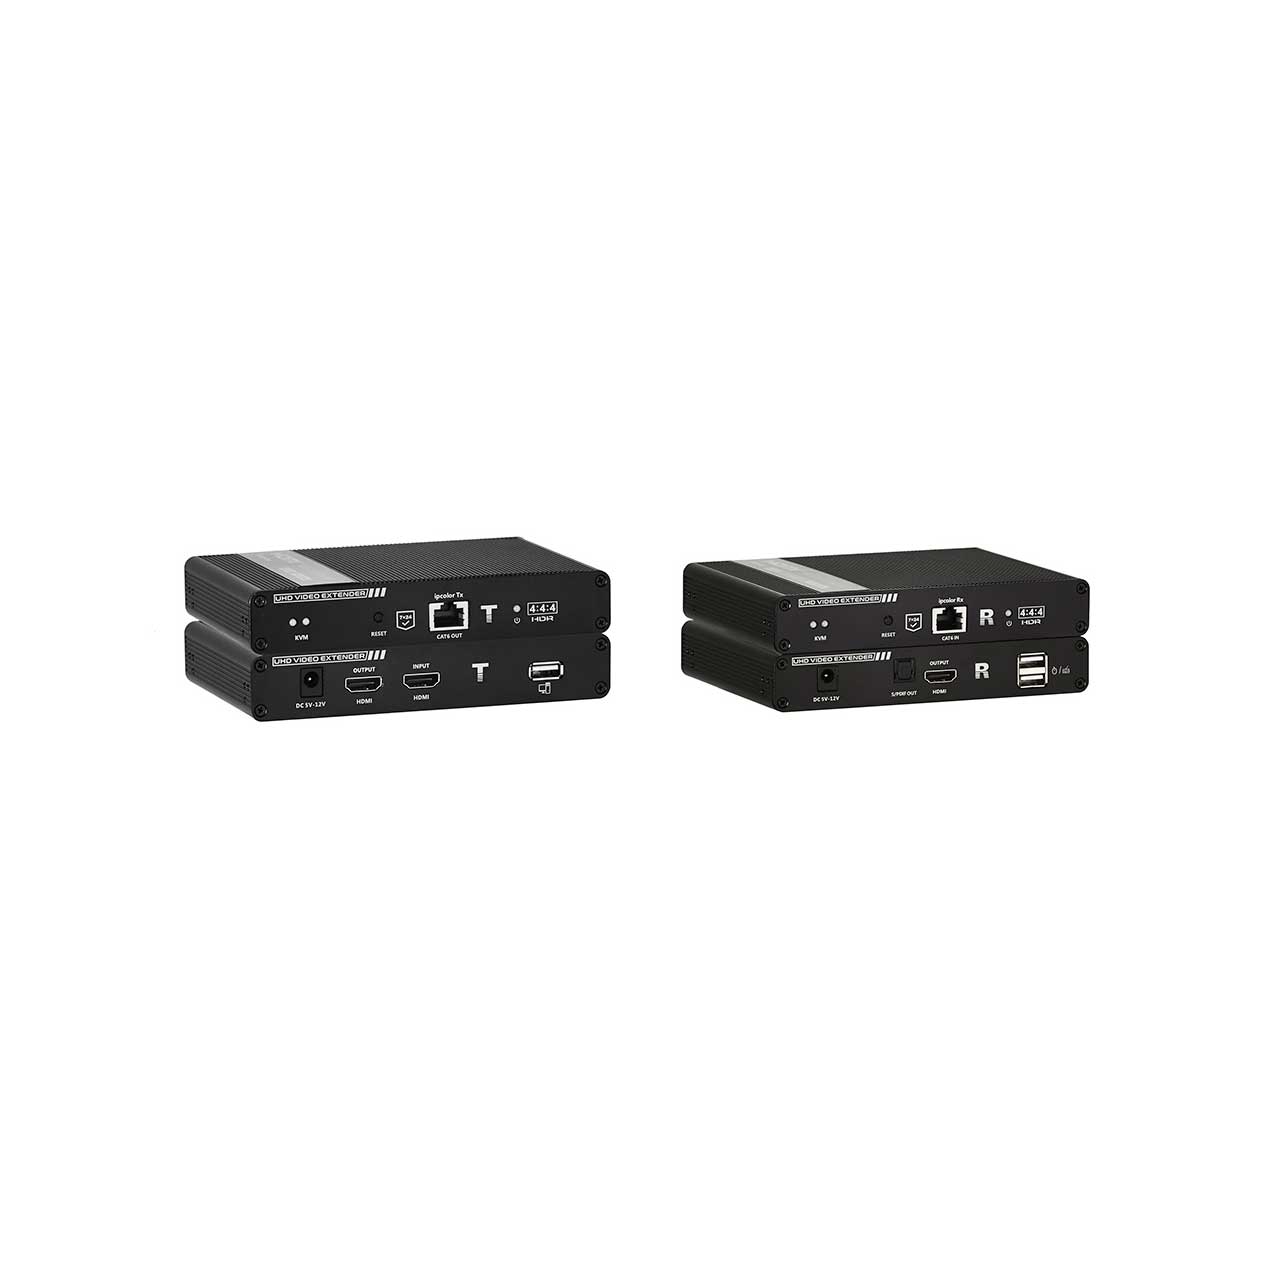 KanexPro EXT-HDMIKVM70M 4K60Hz HDMI KVM Extender over Cat6 with USB 2.0 - up to 230 Feet/70M